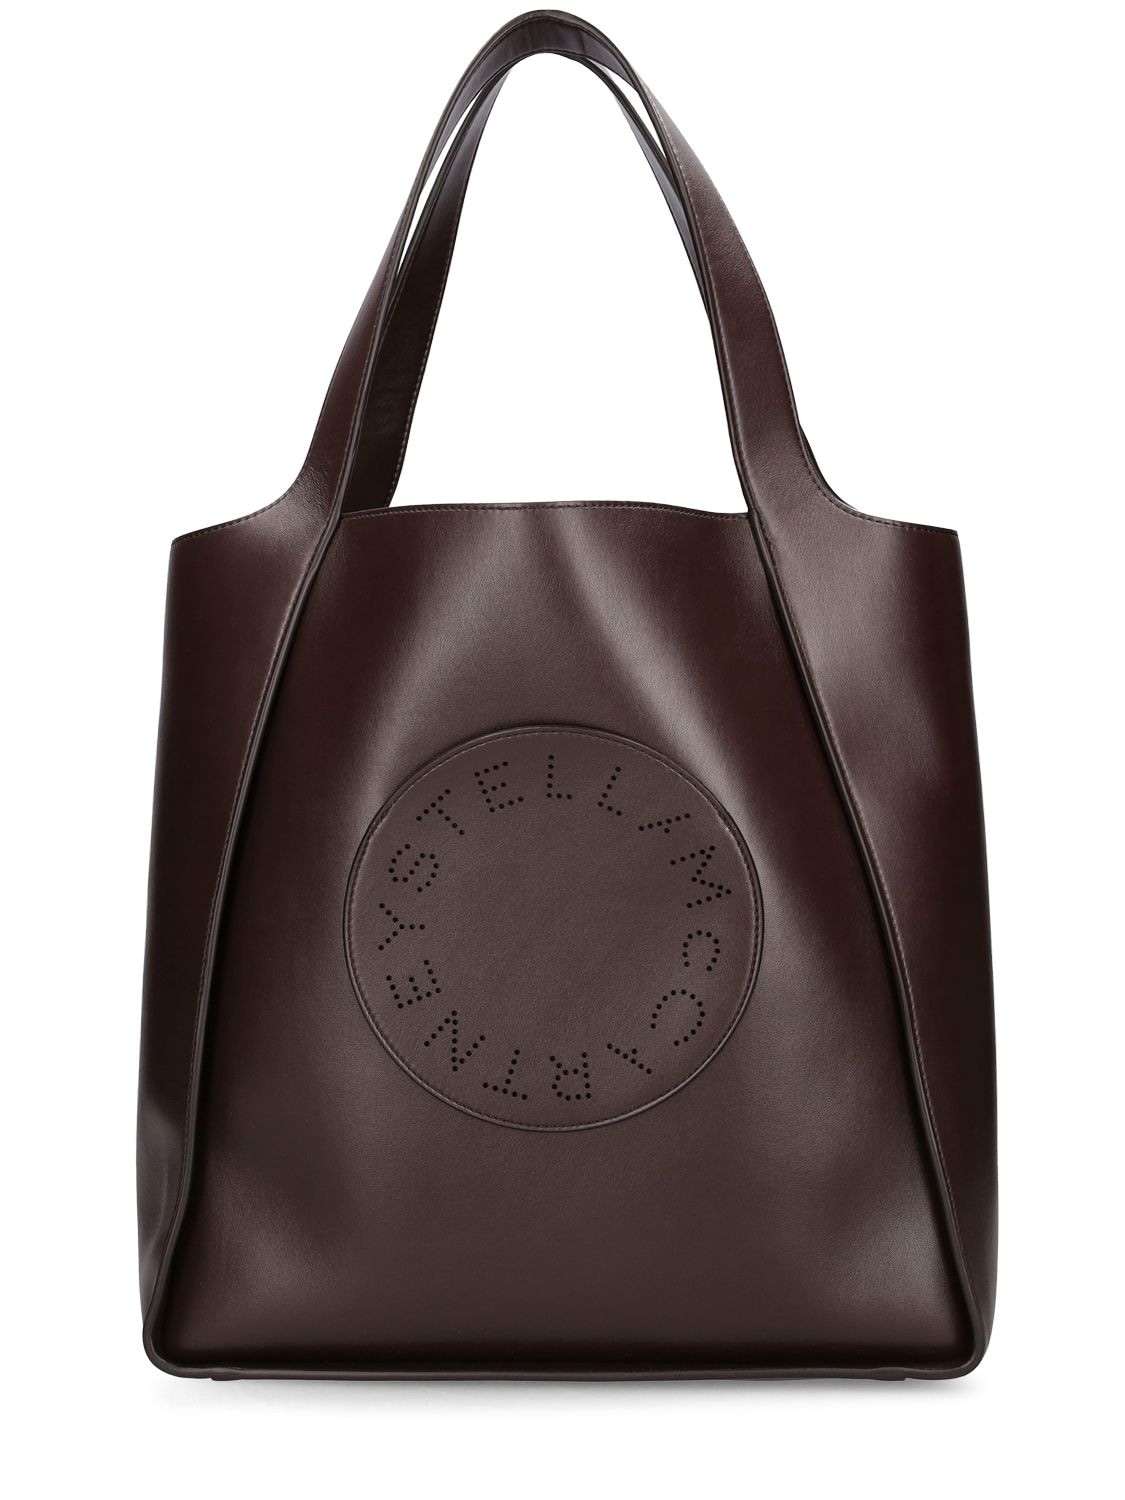 Stella McCartney Alter Mat Faux Leather Tote Bag